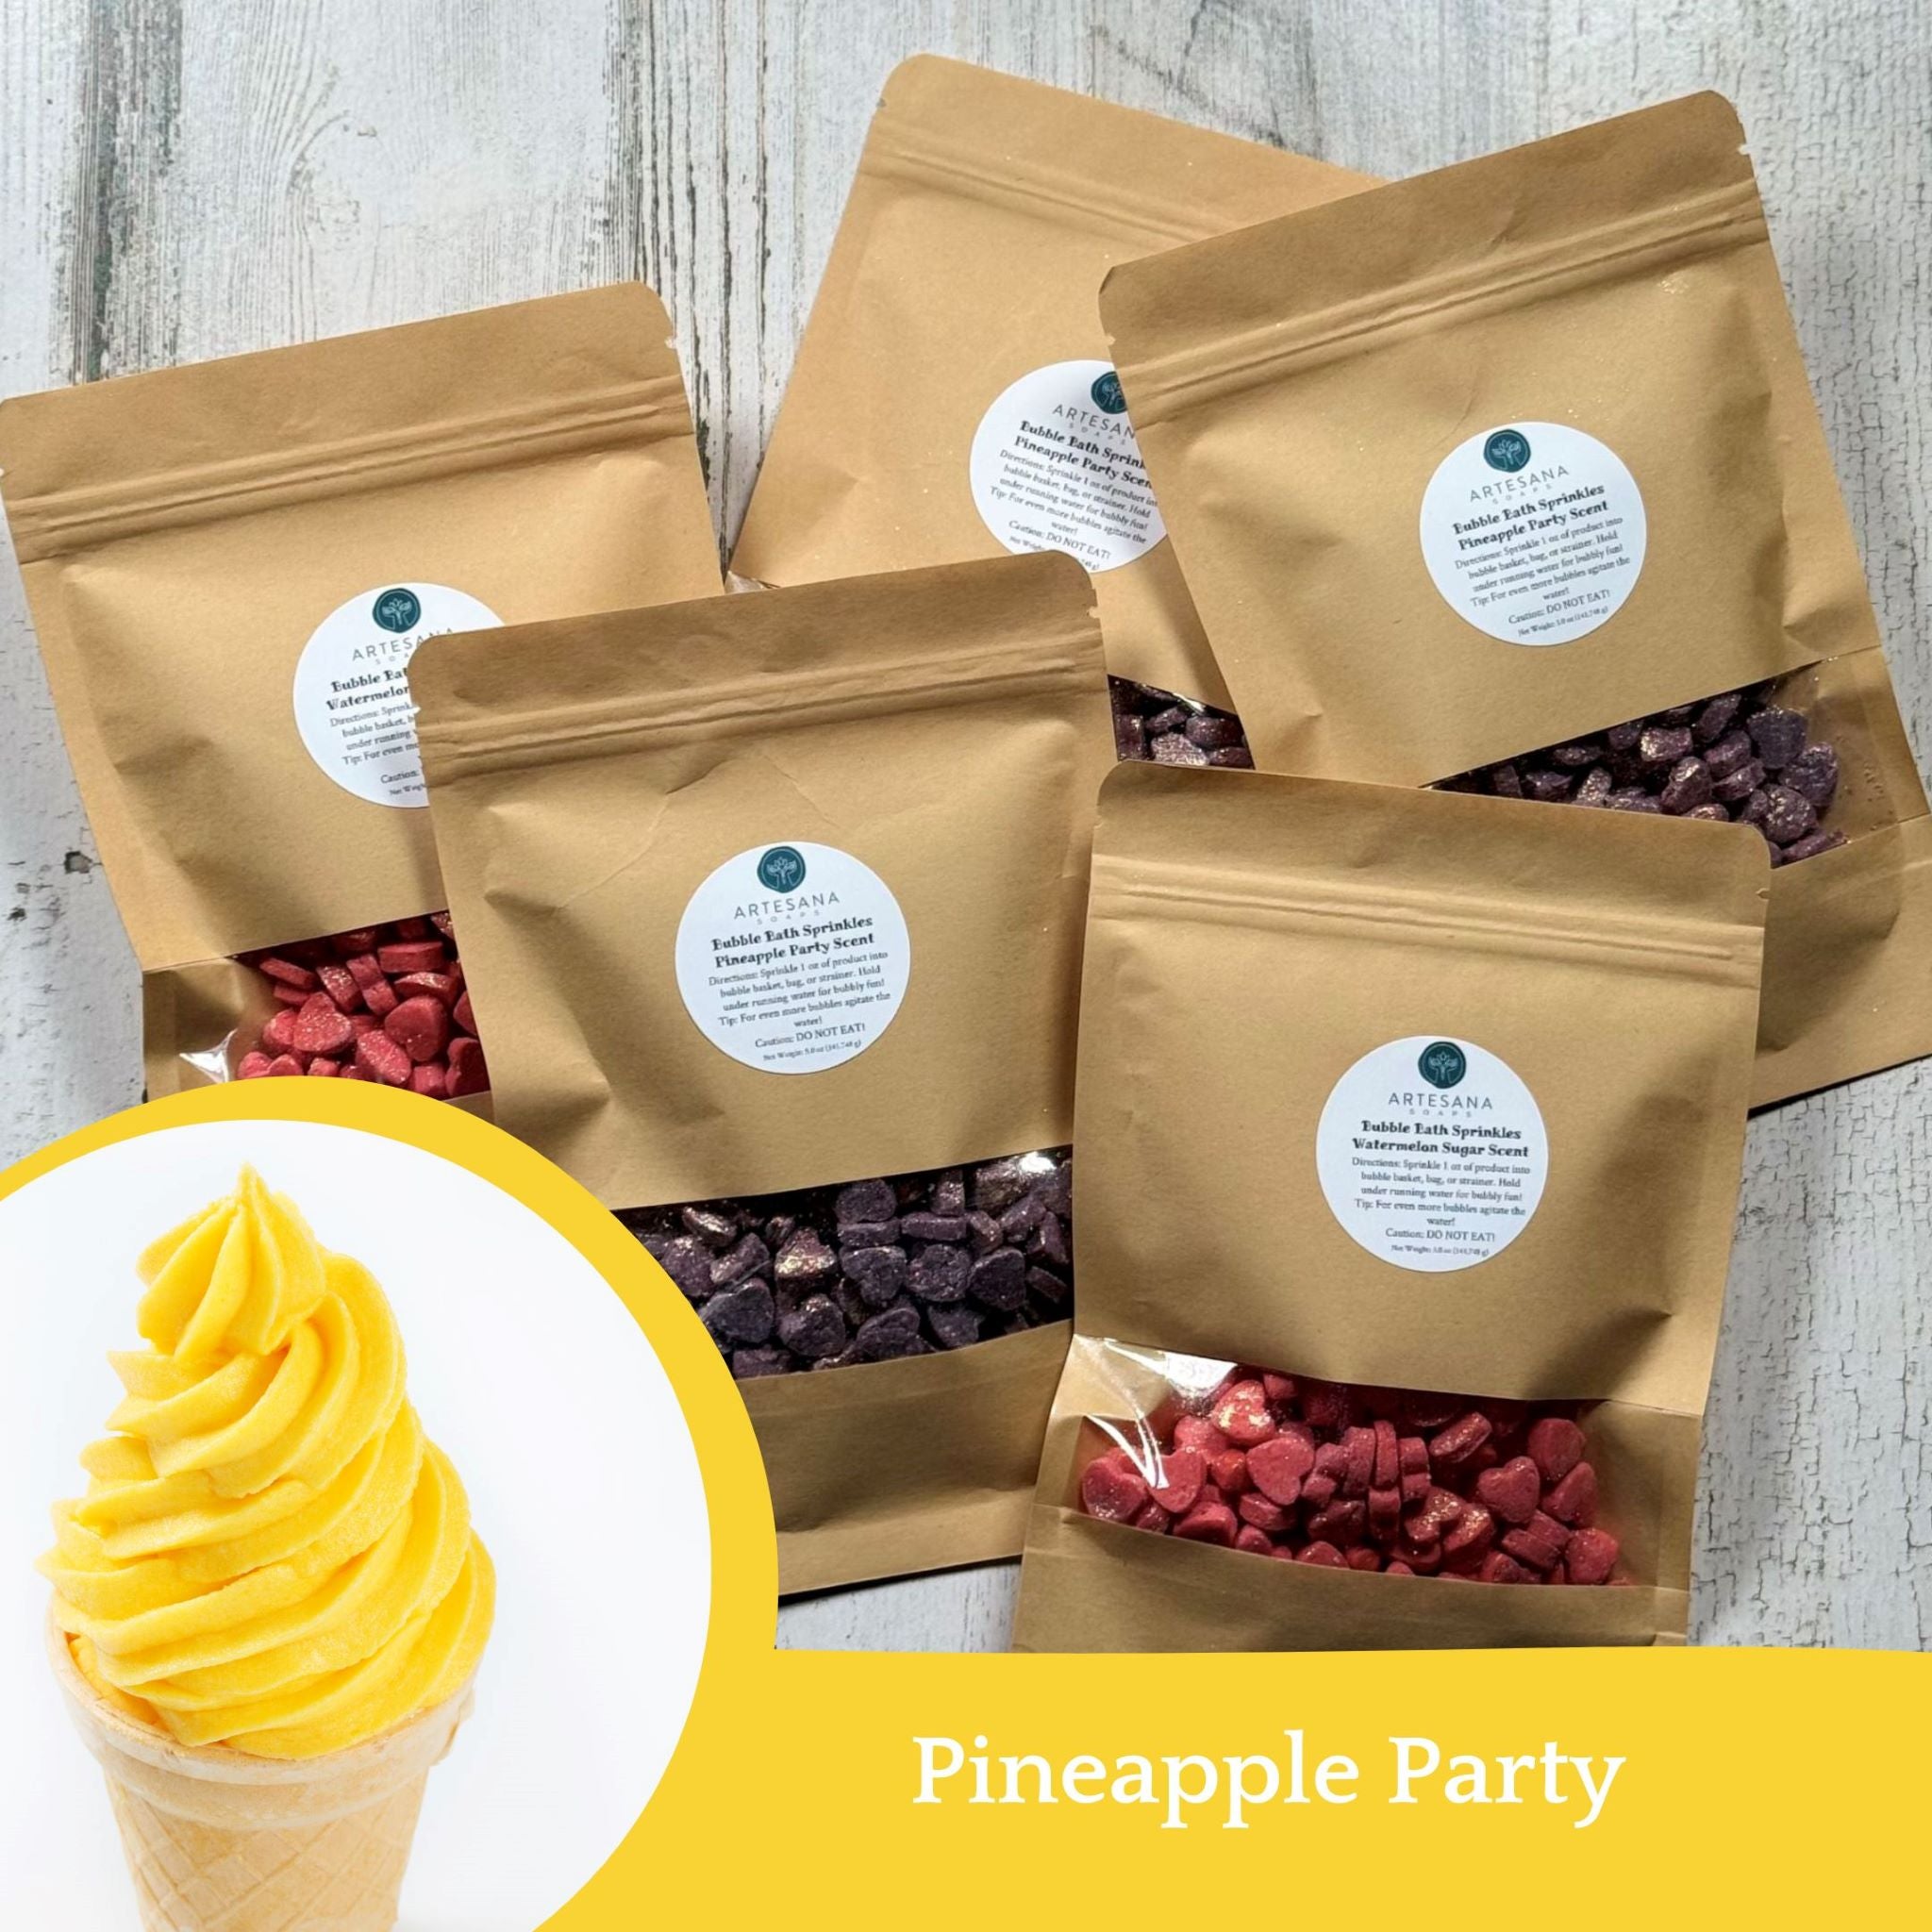 Bubble Bath Sprinkles - Pineapple Party Scent